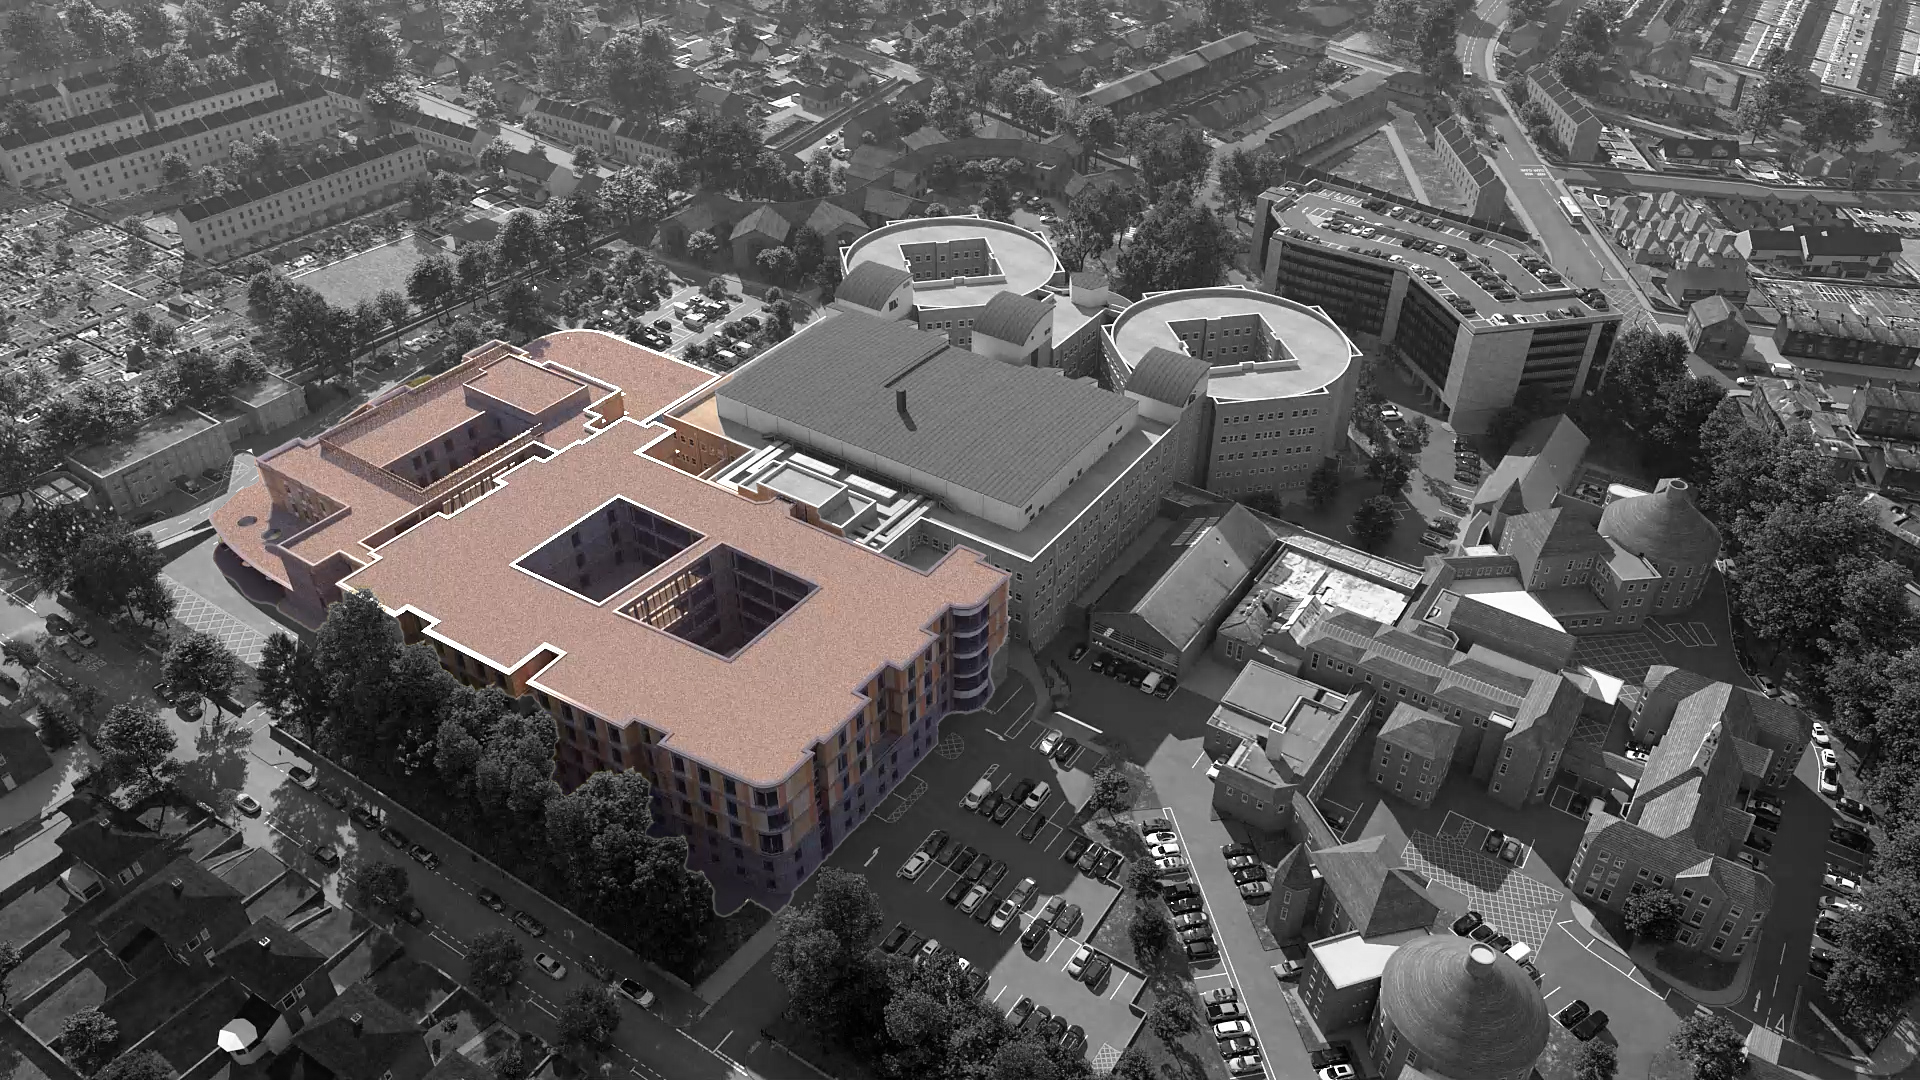 An artist impression which shows the scale of the new building in relation to the current hospital